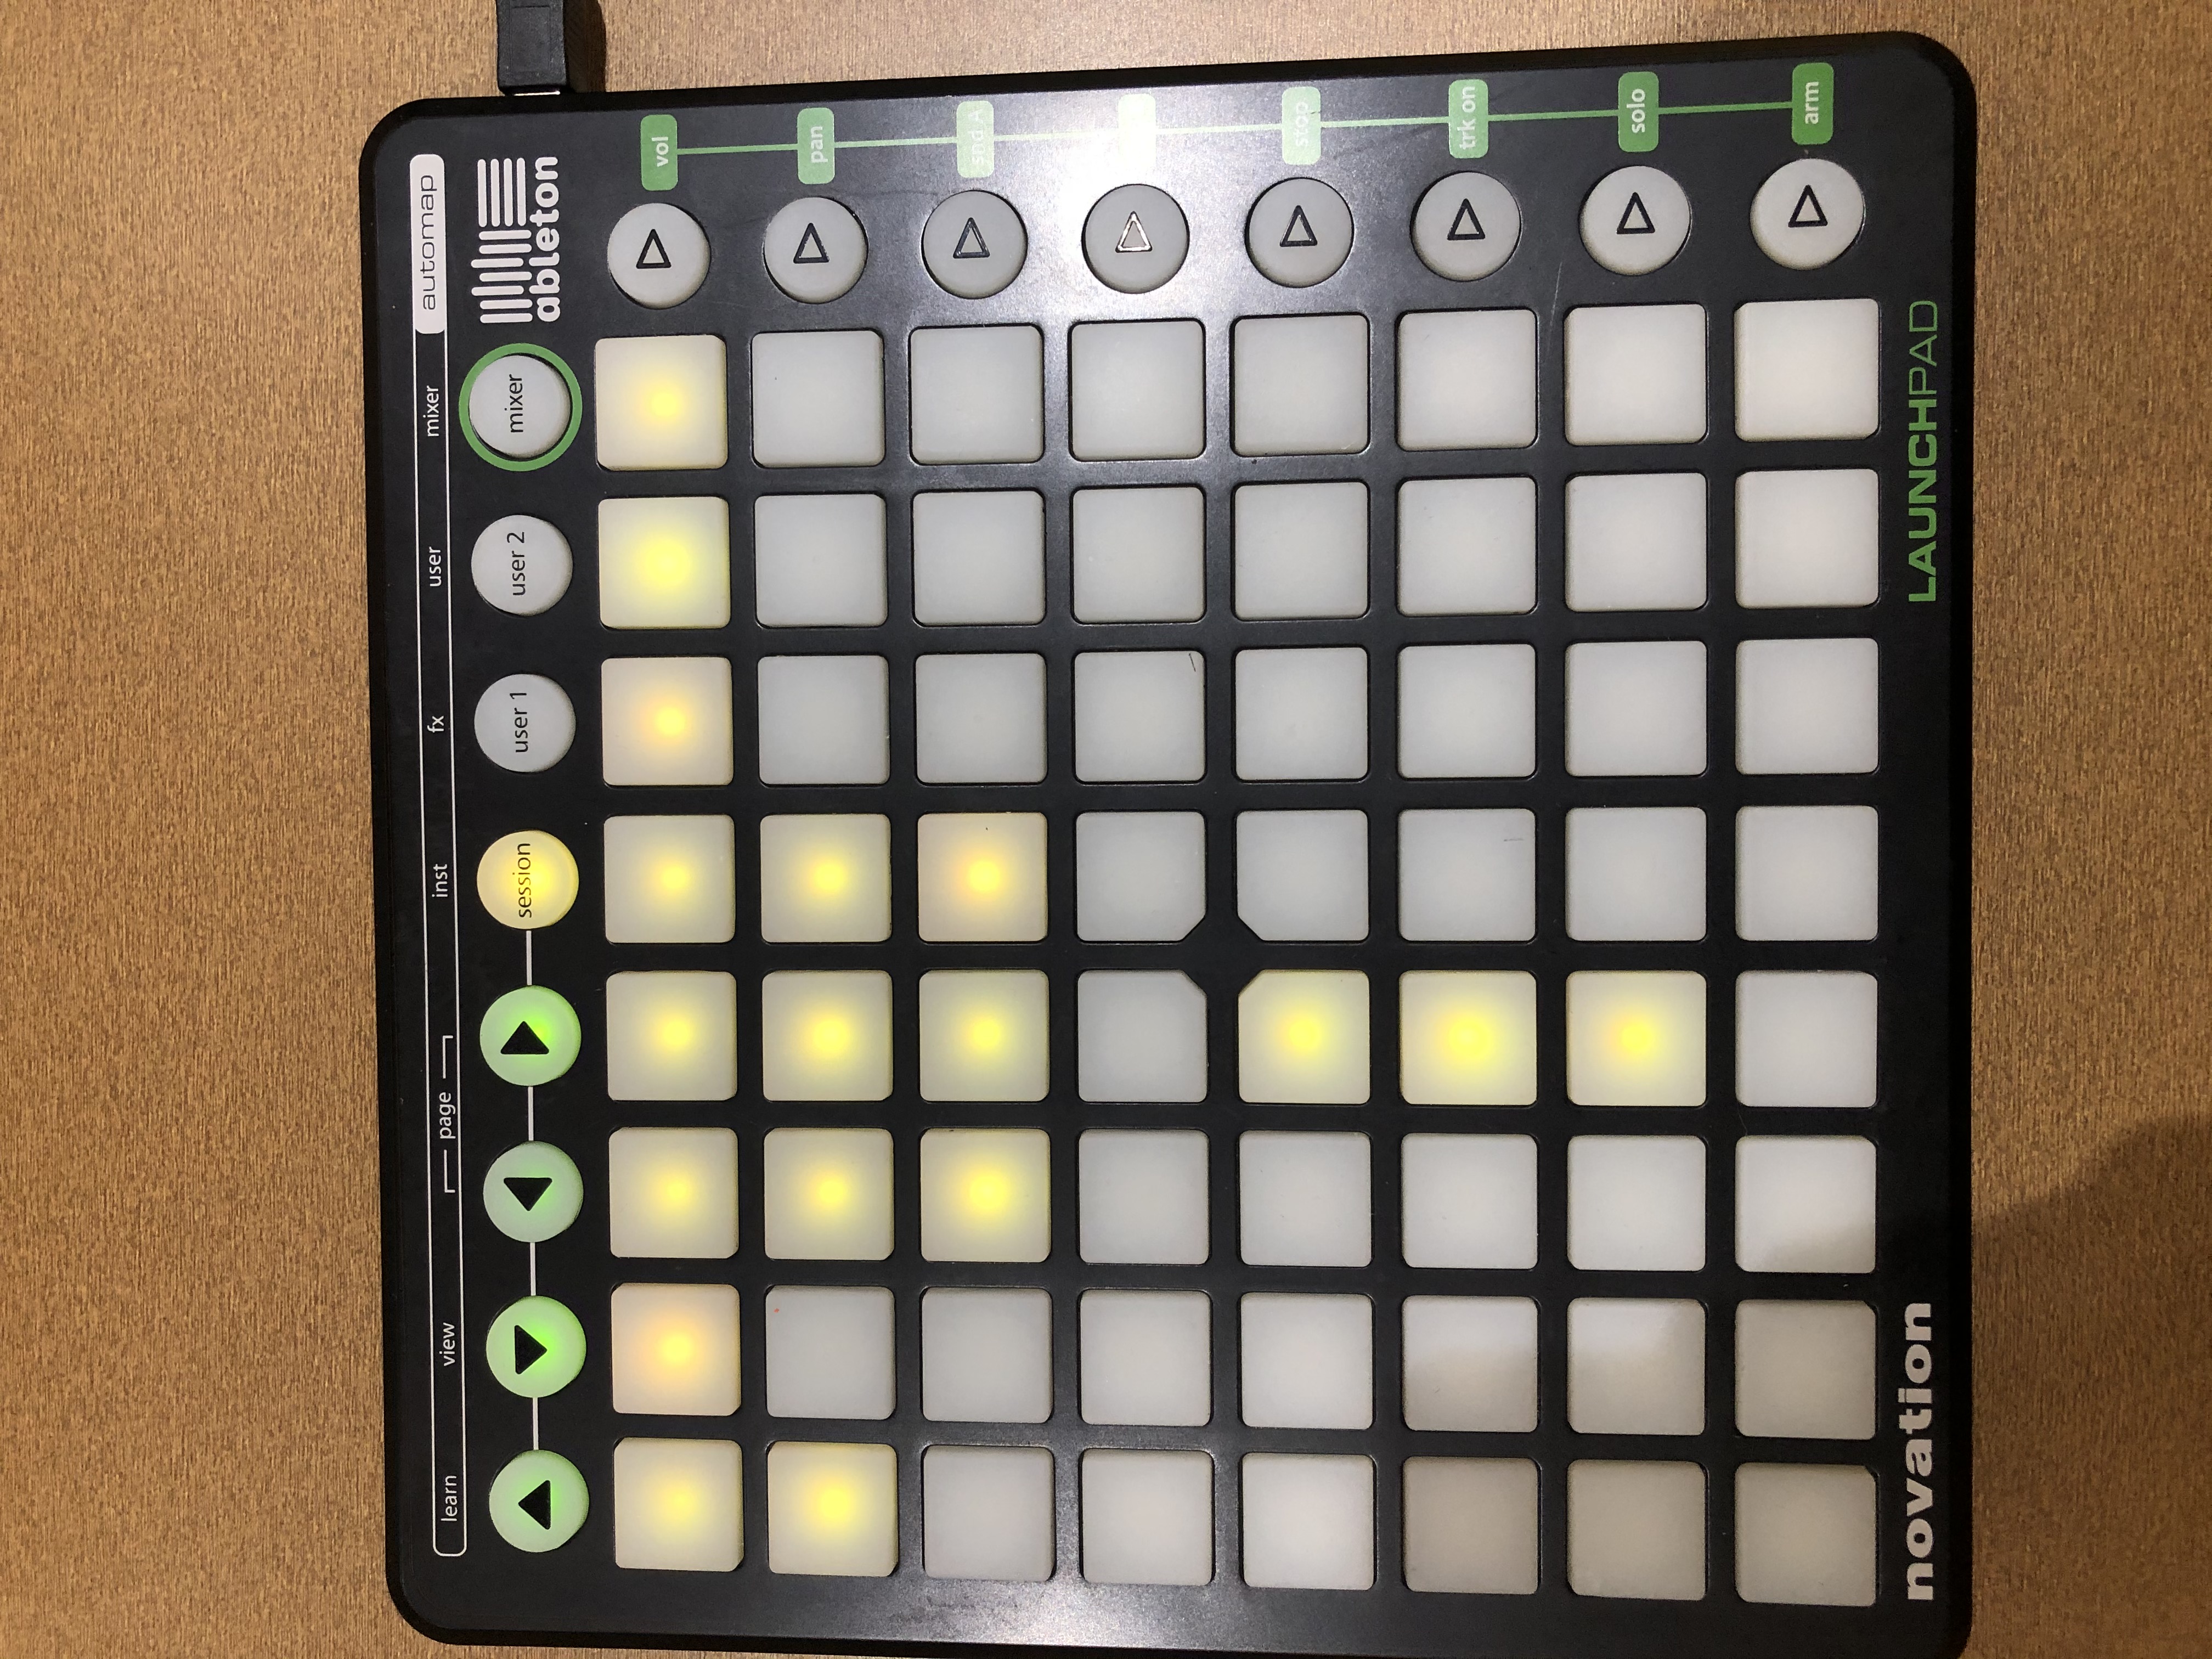 Launchpad when connected to Live